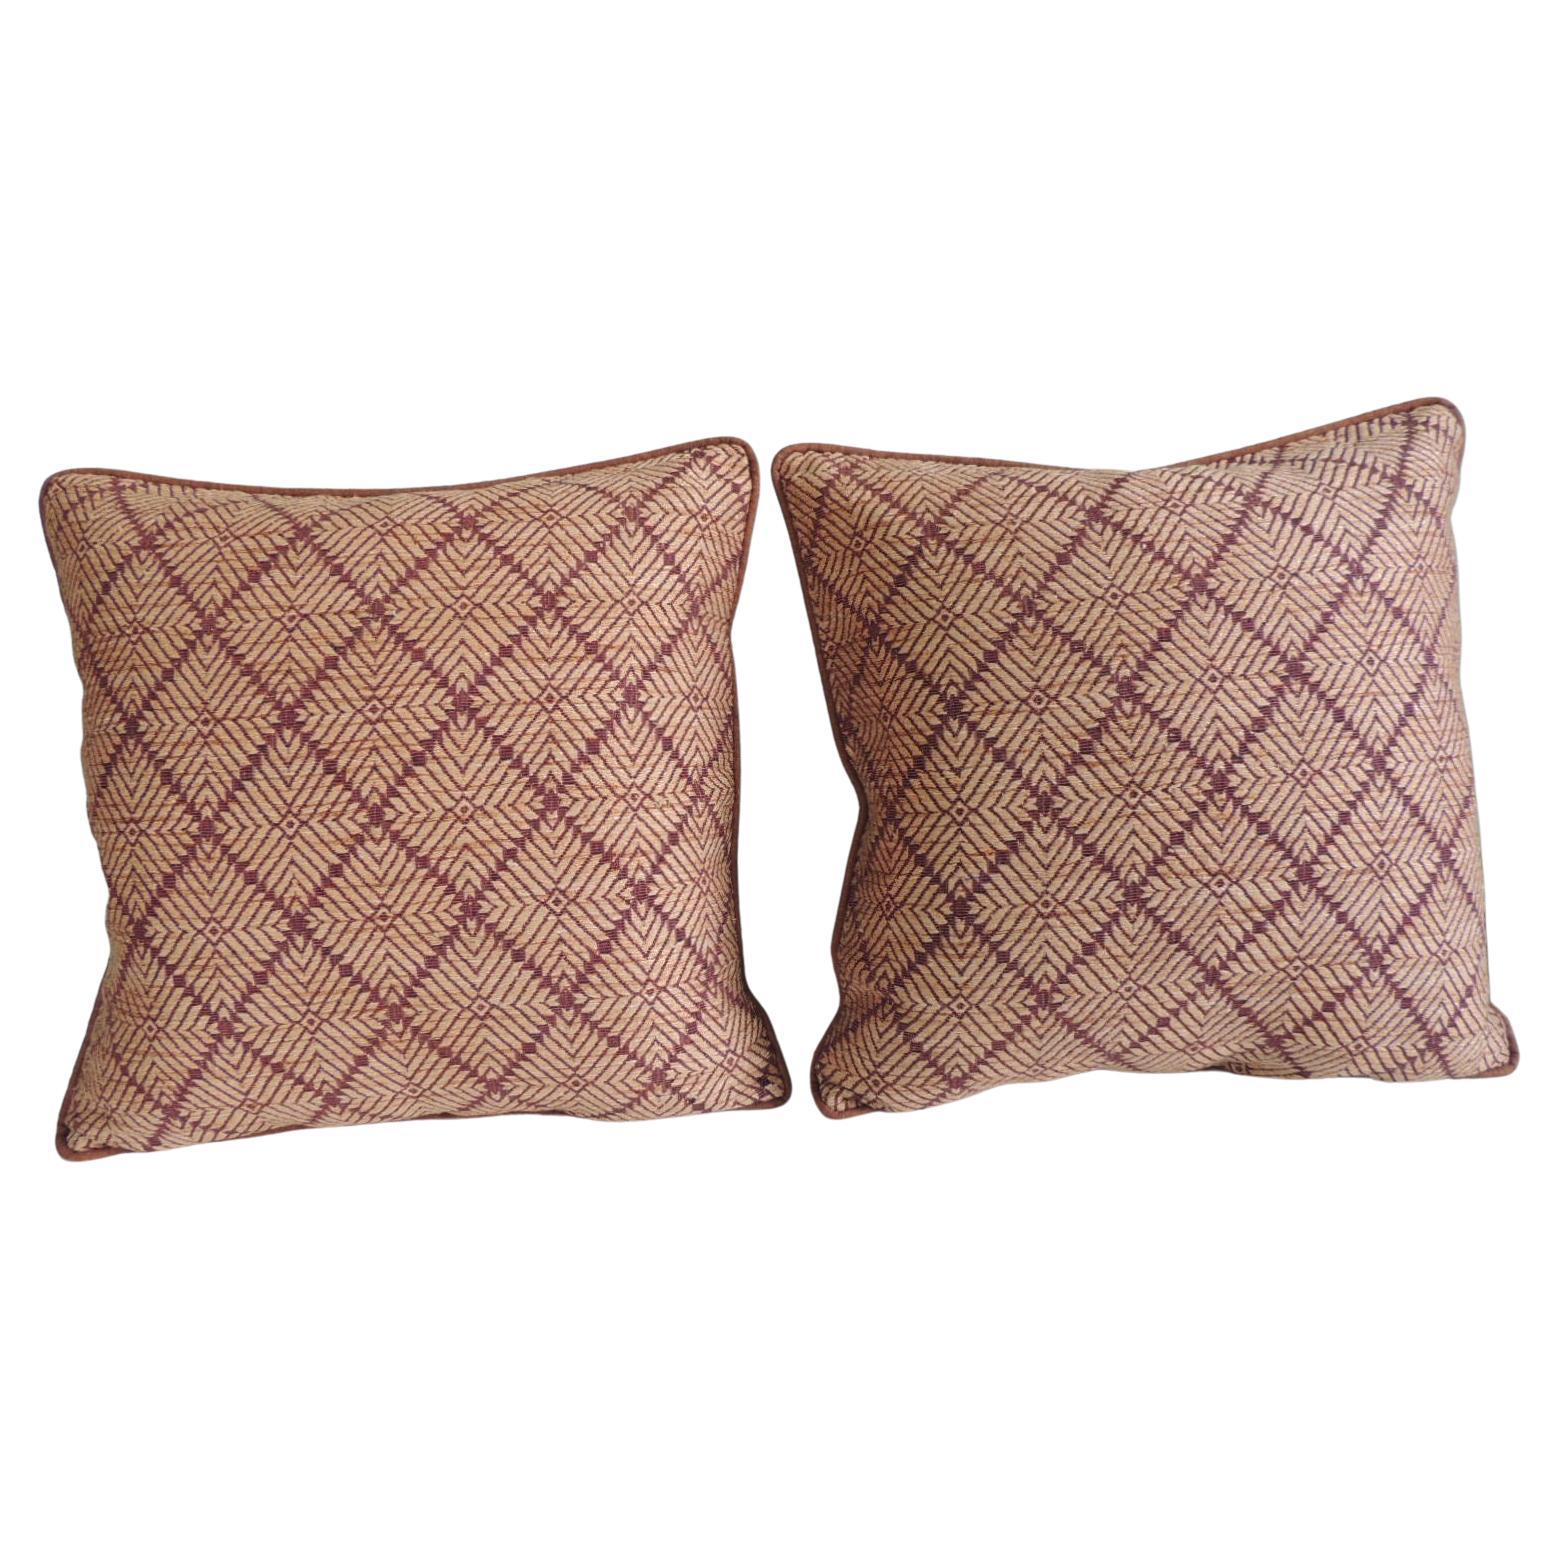 Set of (2) Vintage Brown Woven African Square Decorative Pillows